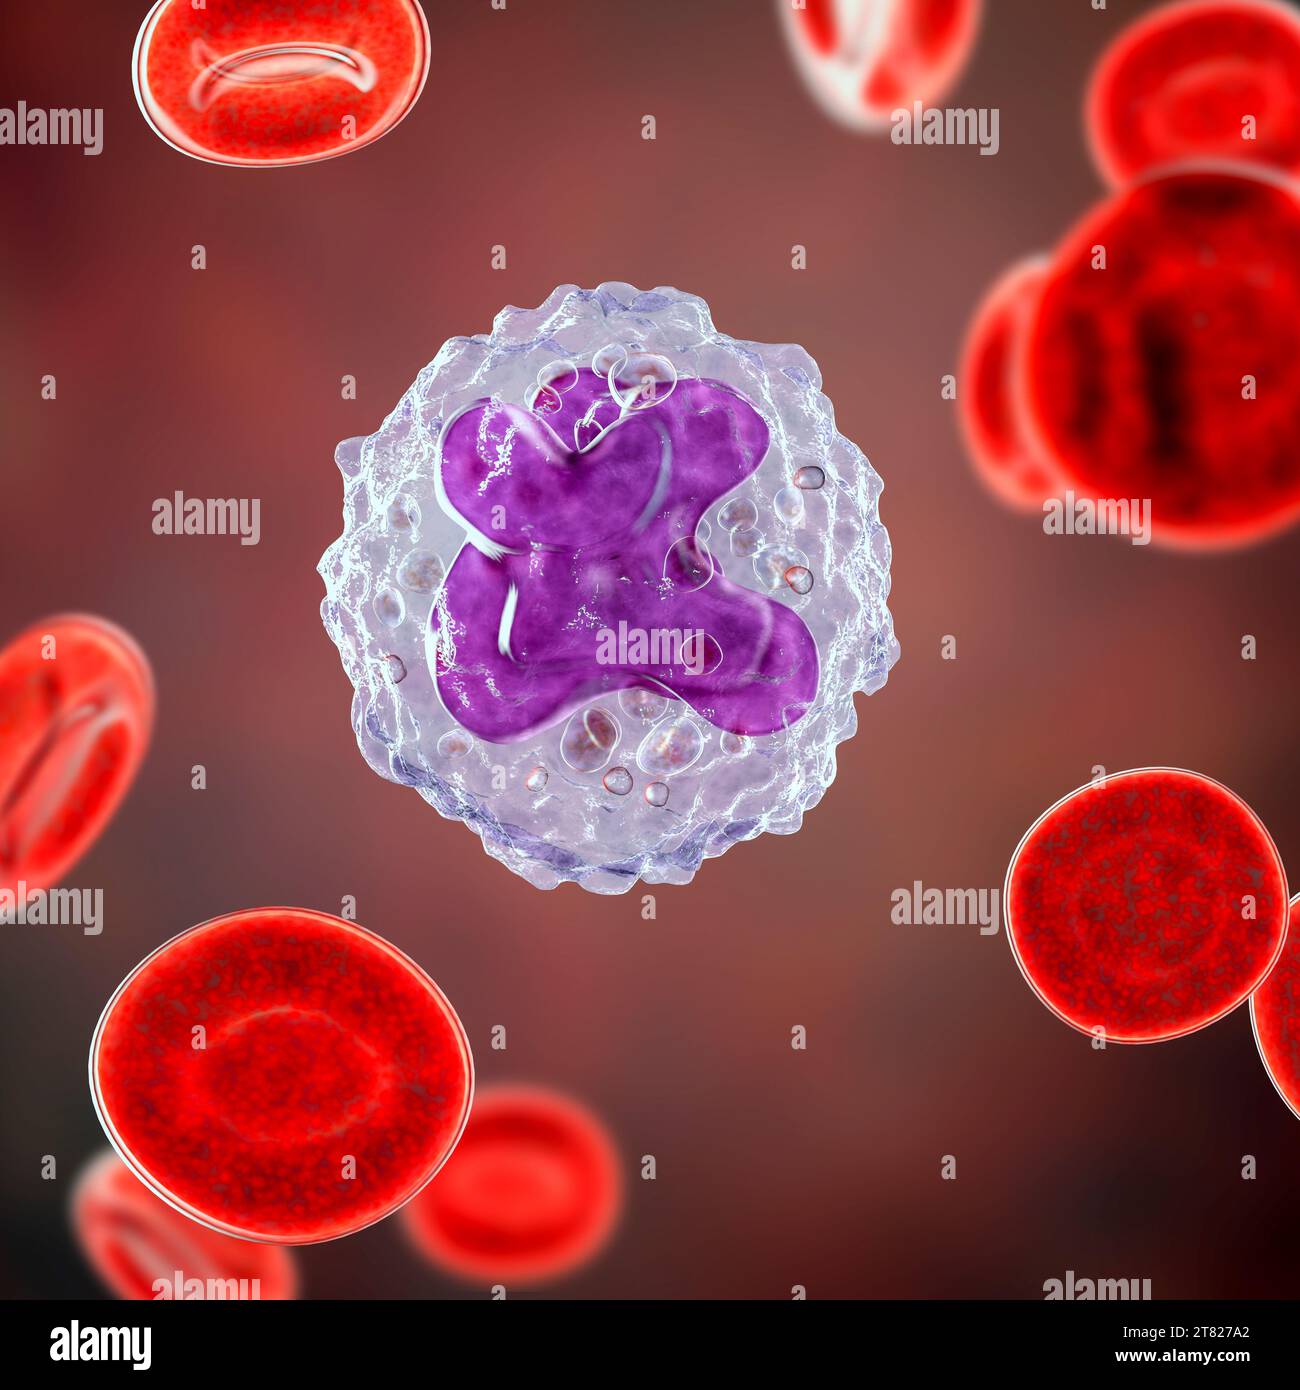 Monocyte and red blood cells, illustration Stock Photo